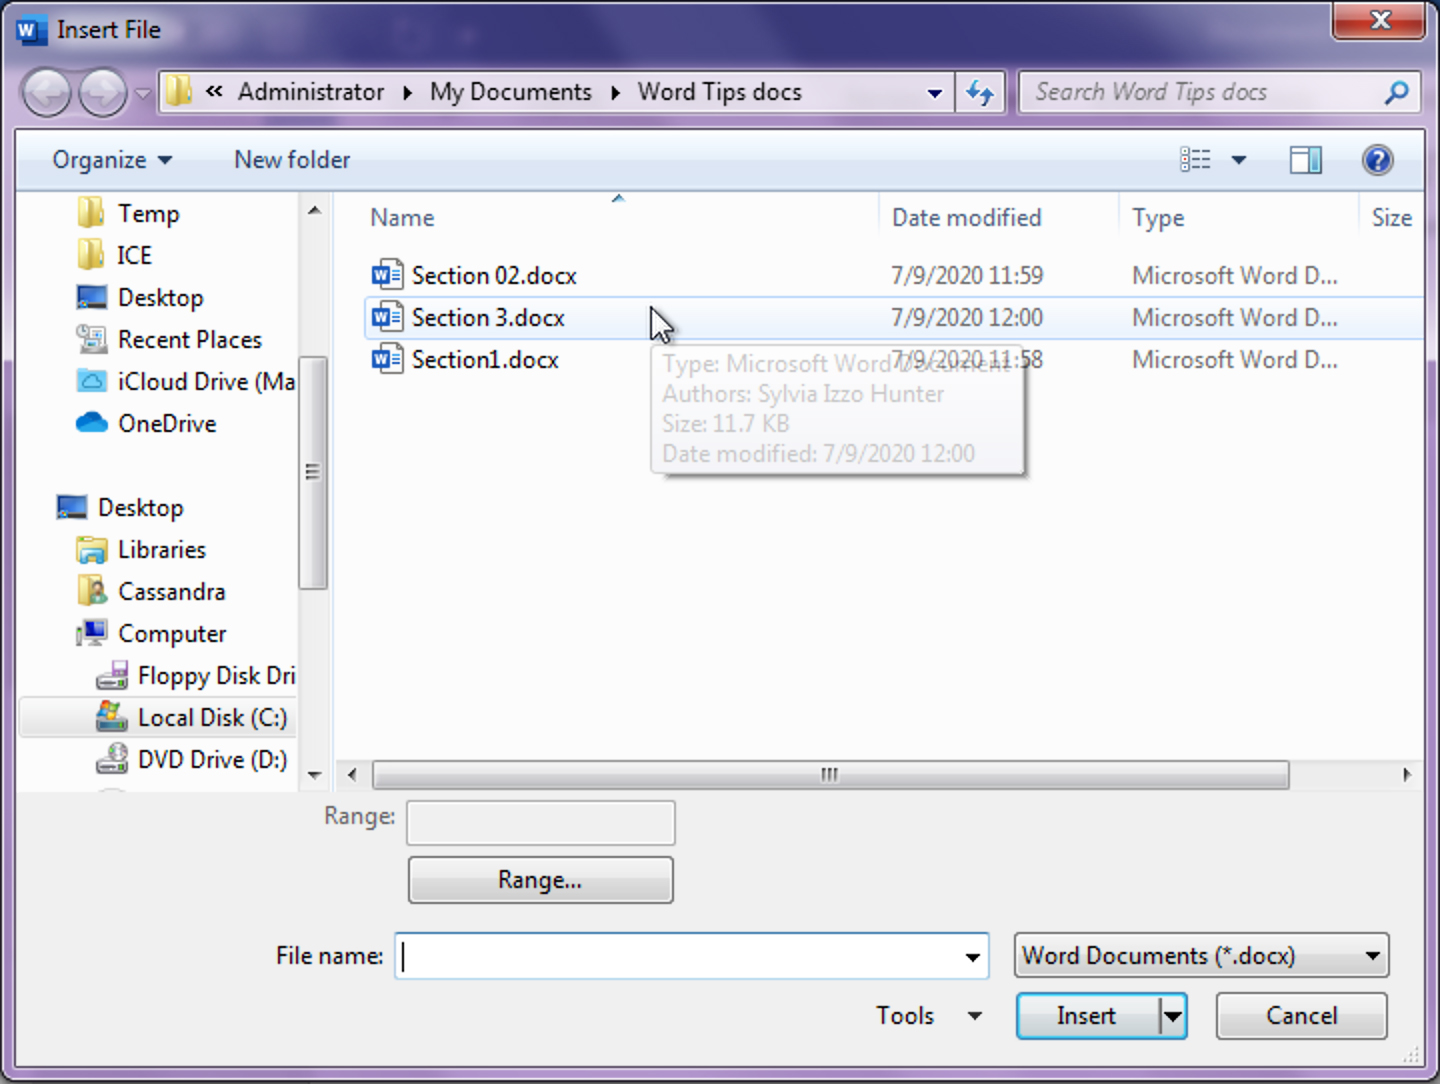 Screenshot: Insert File dialog box, showing Word files titled Section 02.docx, Section 3.docx, and Section1.docx